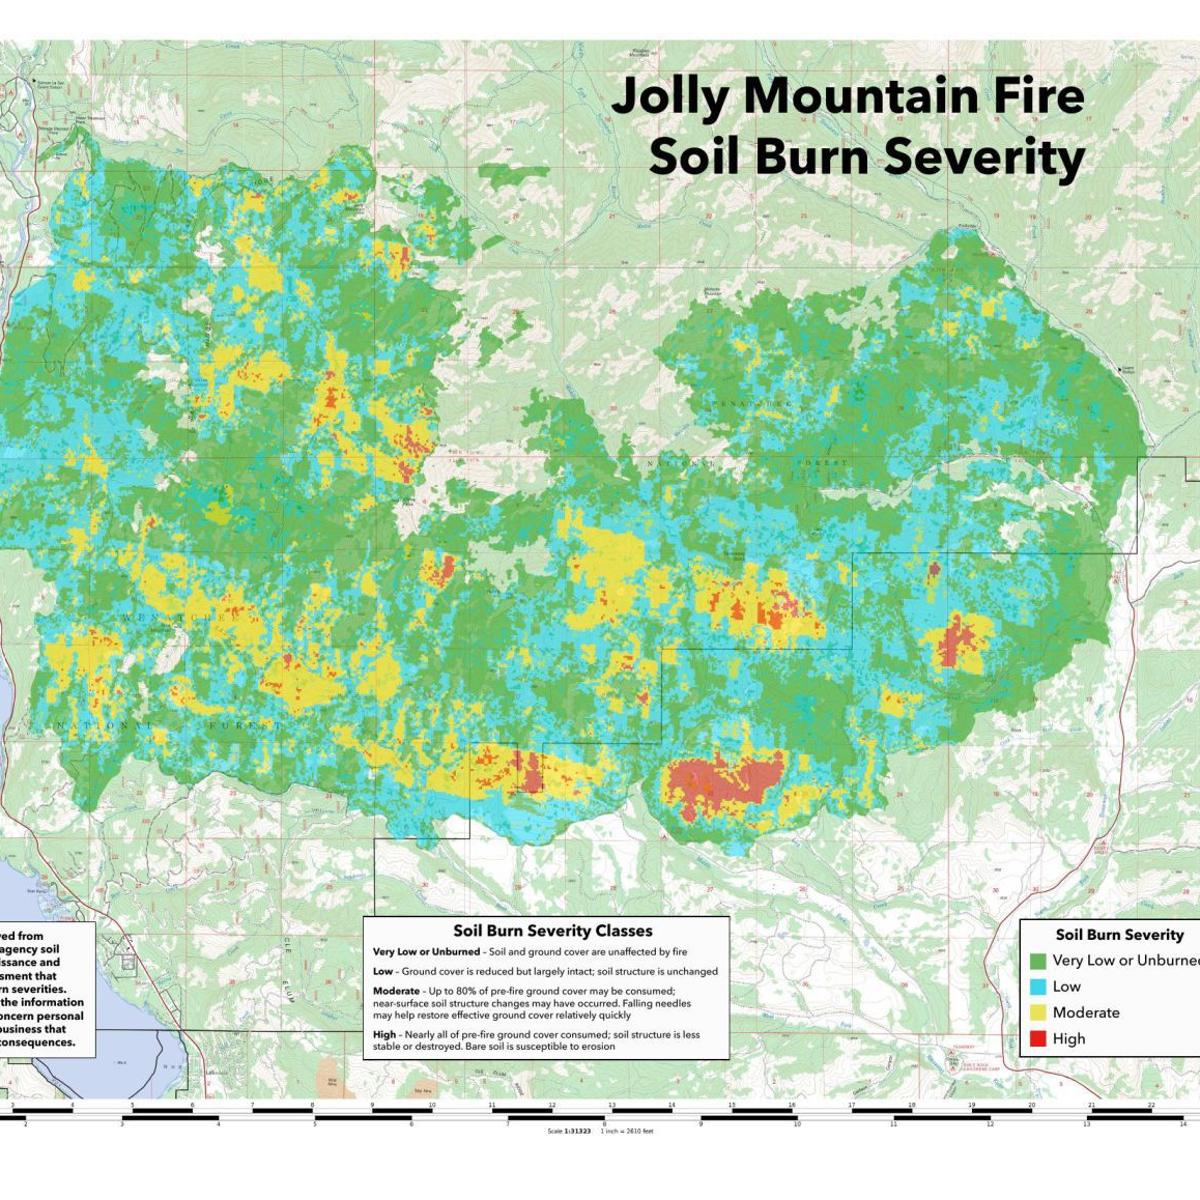 Mapping Shows Less Damage To Land Than First Expected After Jolly